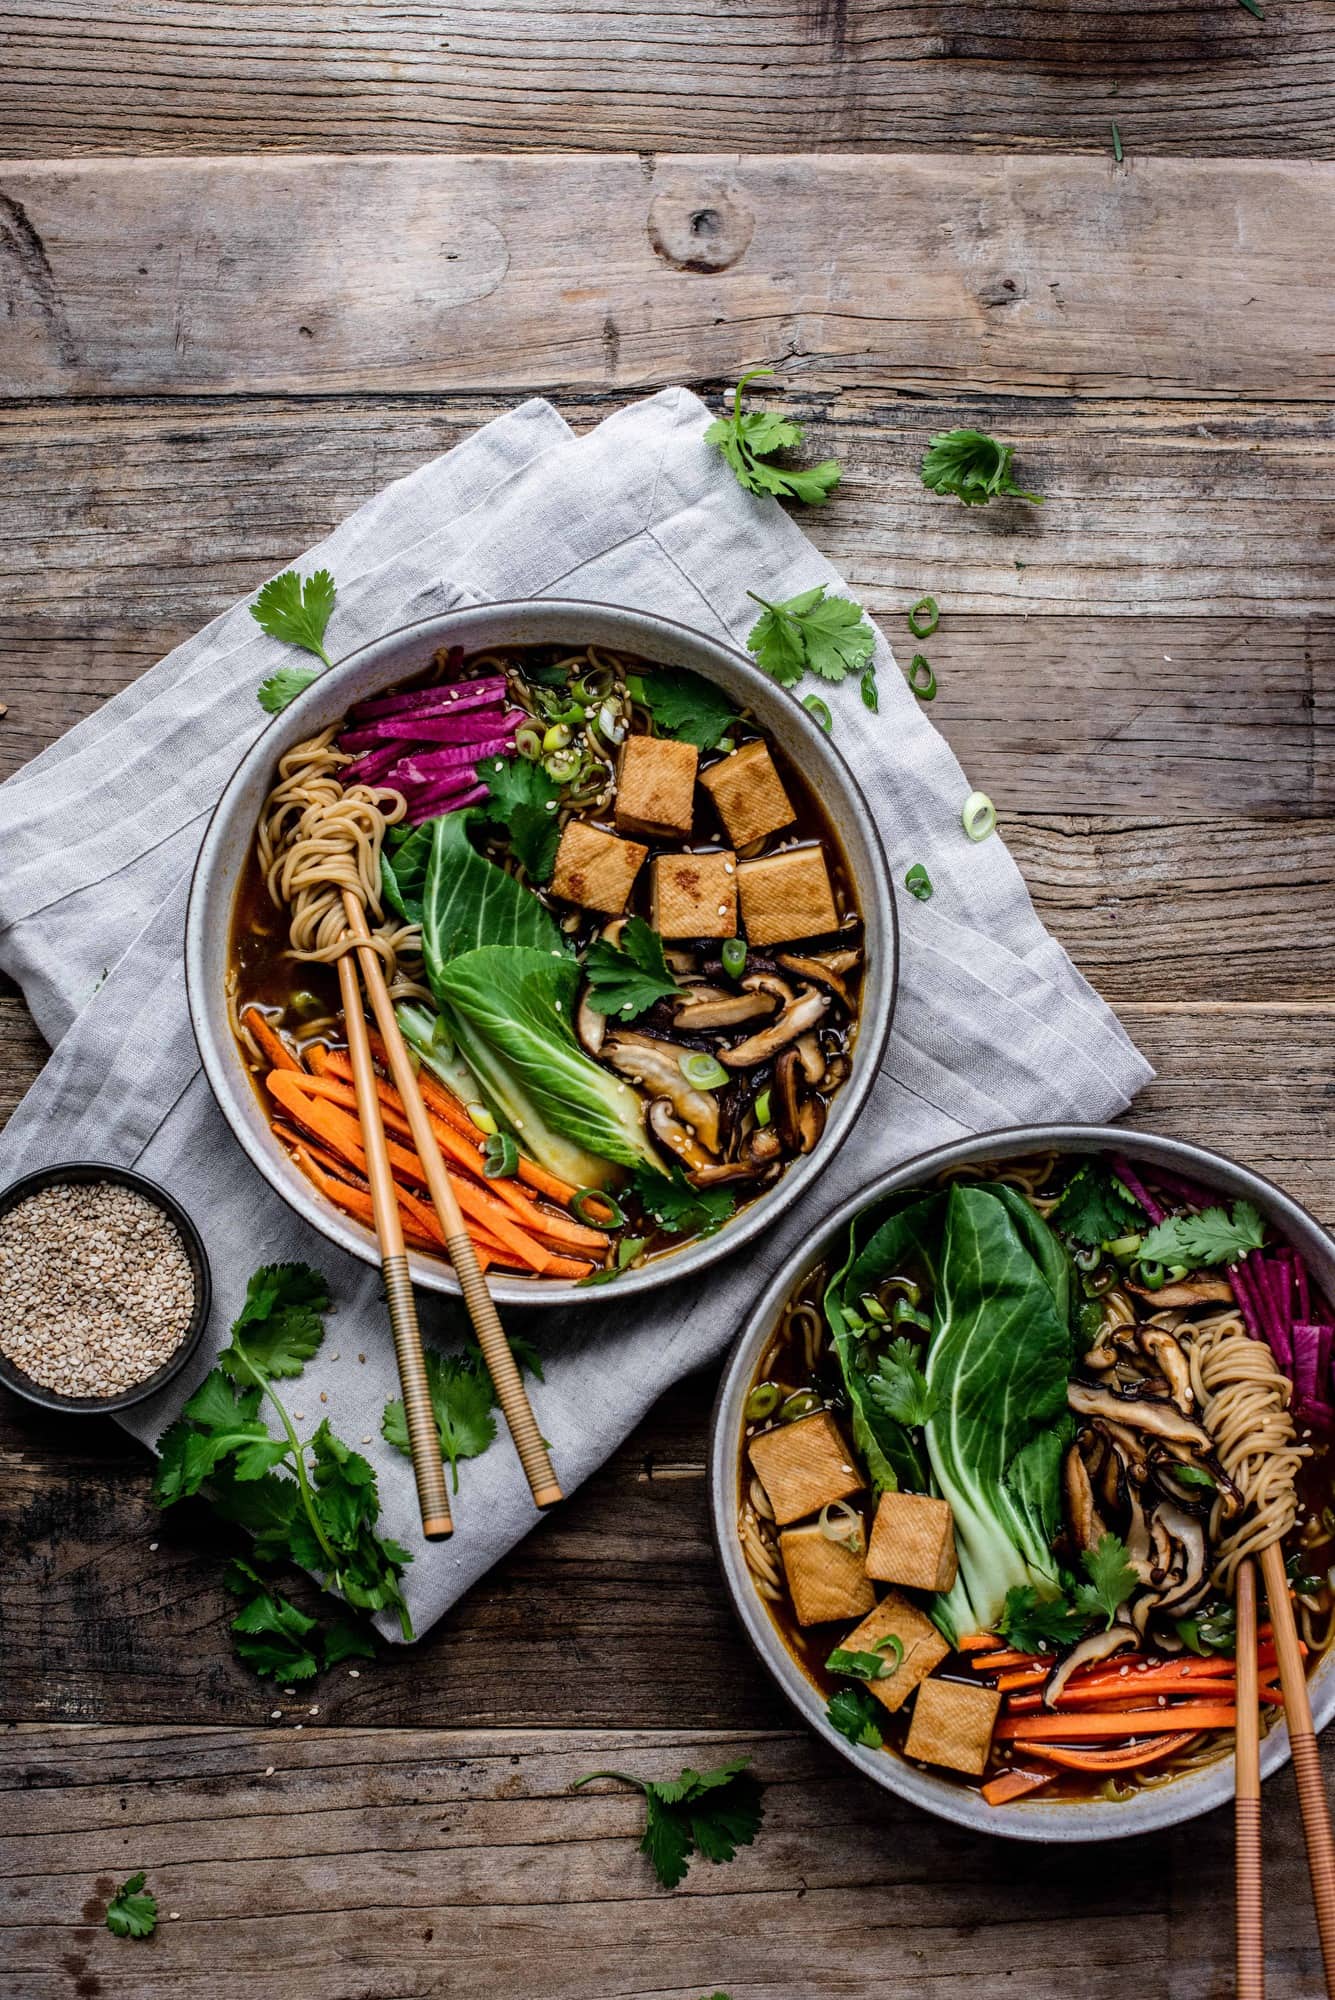 Overhead view of homemade vegan ramen in a white bowl with chopsticks, bok choy, tofu, mushrooms, carrots and noodles